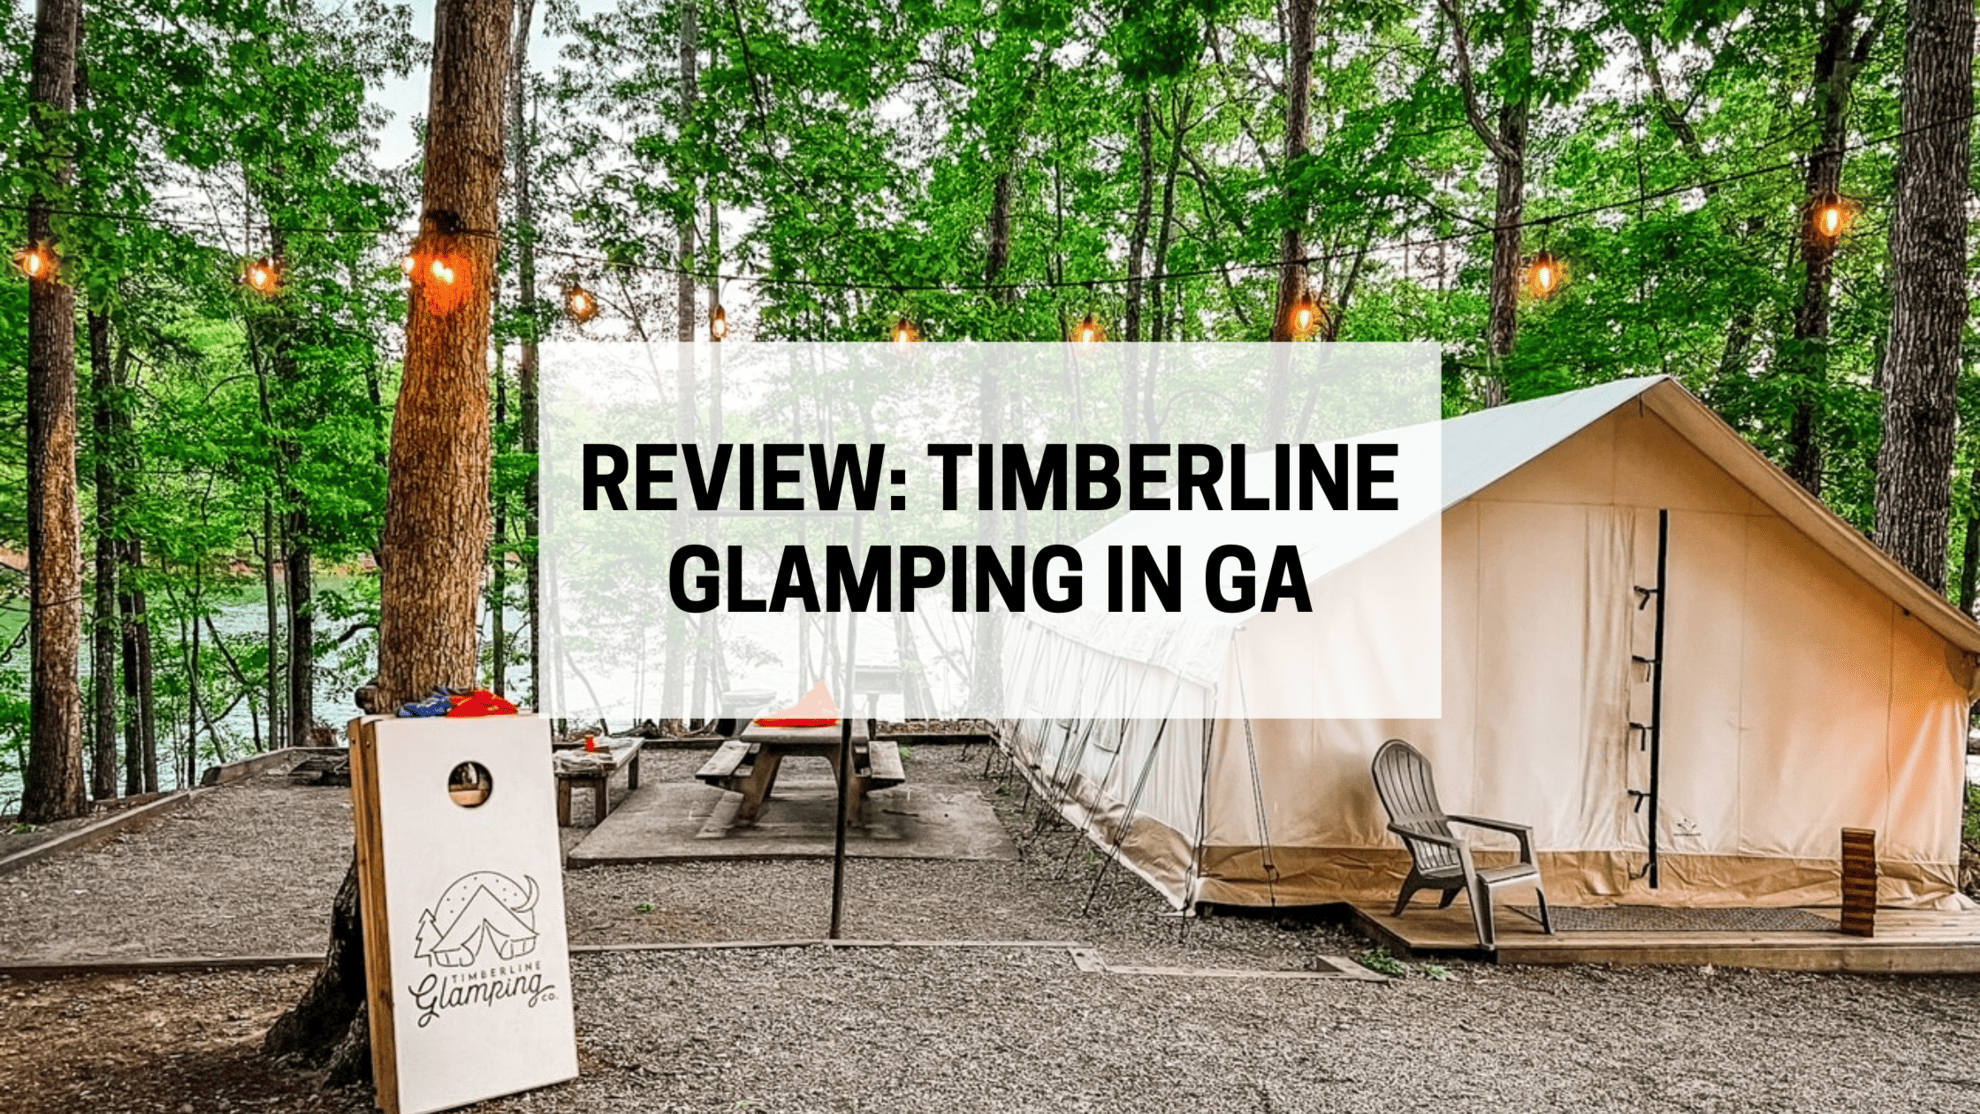 Timberline Glamping: Experience the Best Glamping Site in Georgia